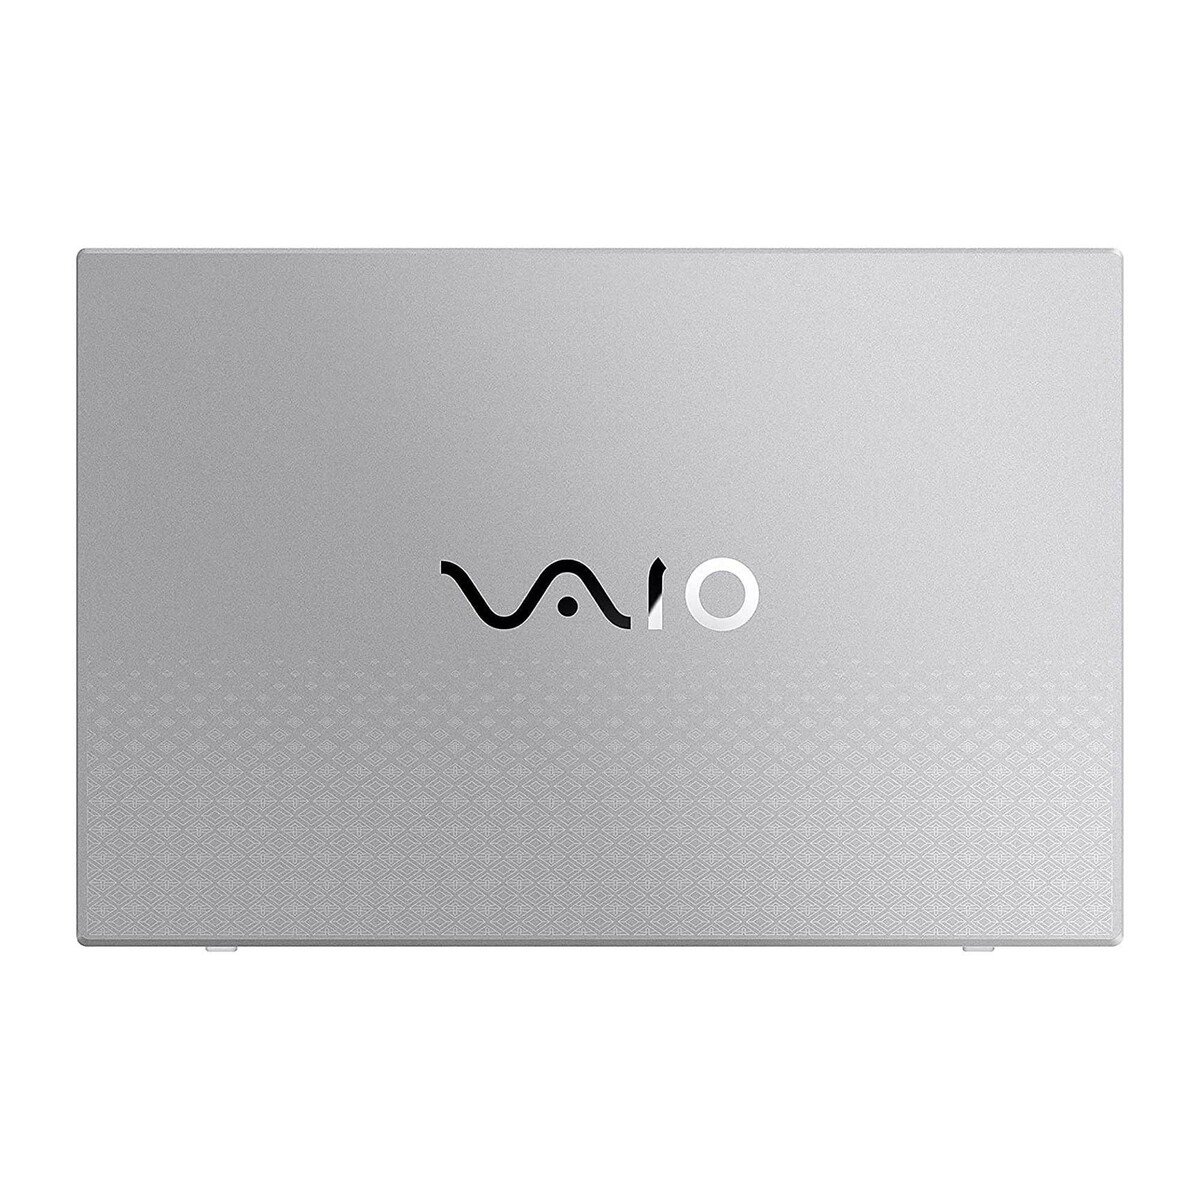 Vaio E15 NE15V2ME027P AMD R7-3700U Processor, 8GB RAM, 512GB SSD, Shared Graphics, 15.6inch FHD, Windows 10, Silver